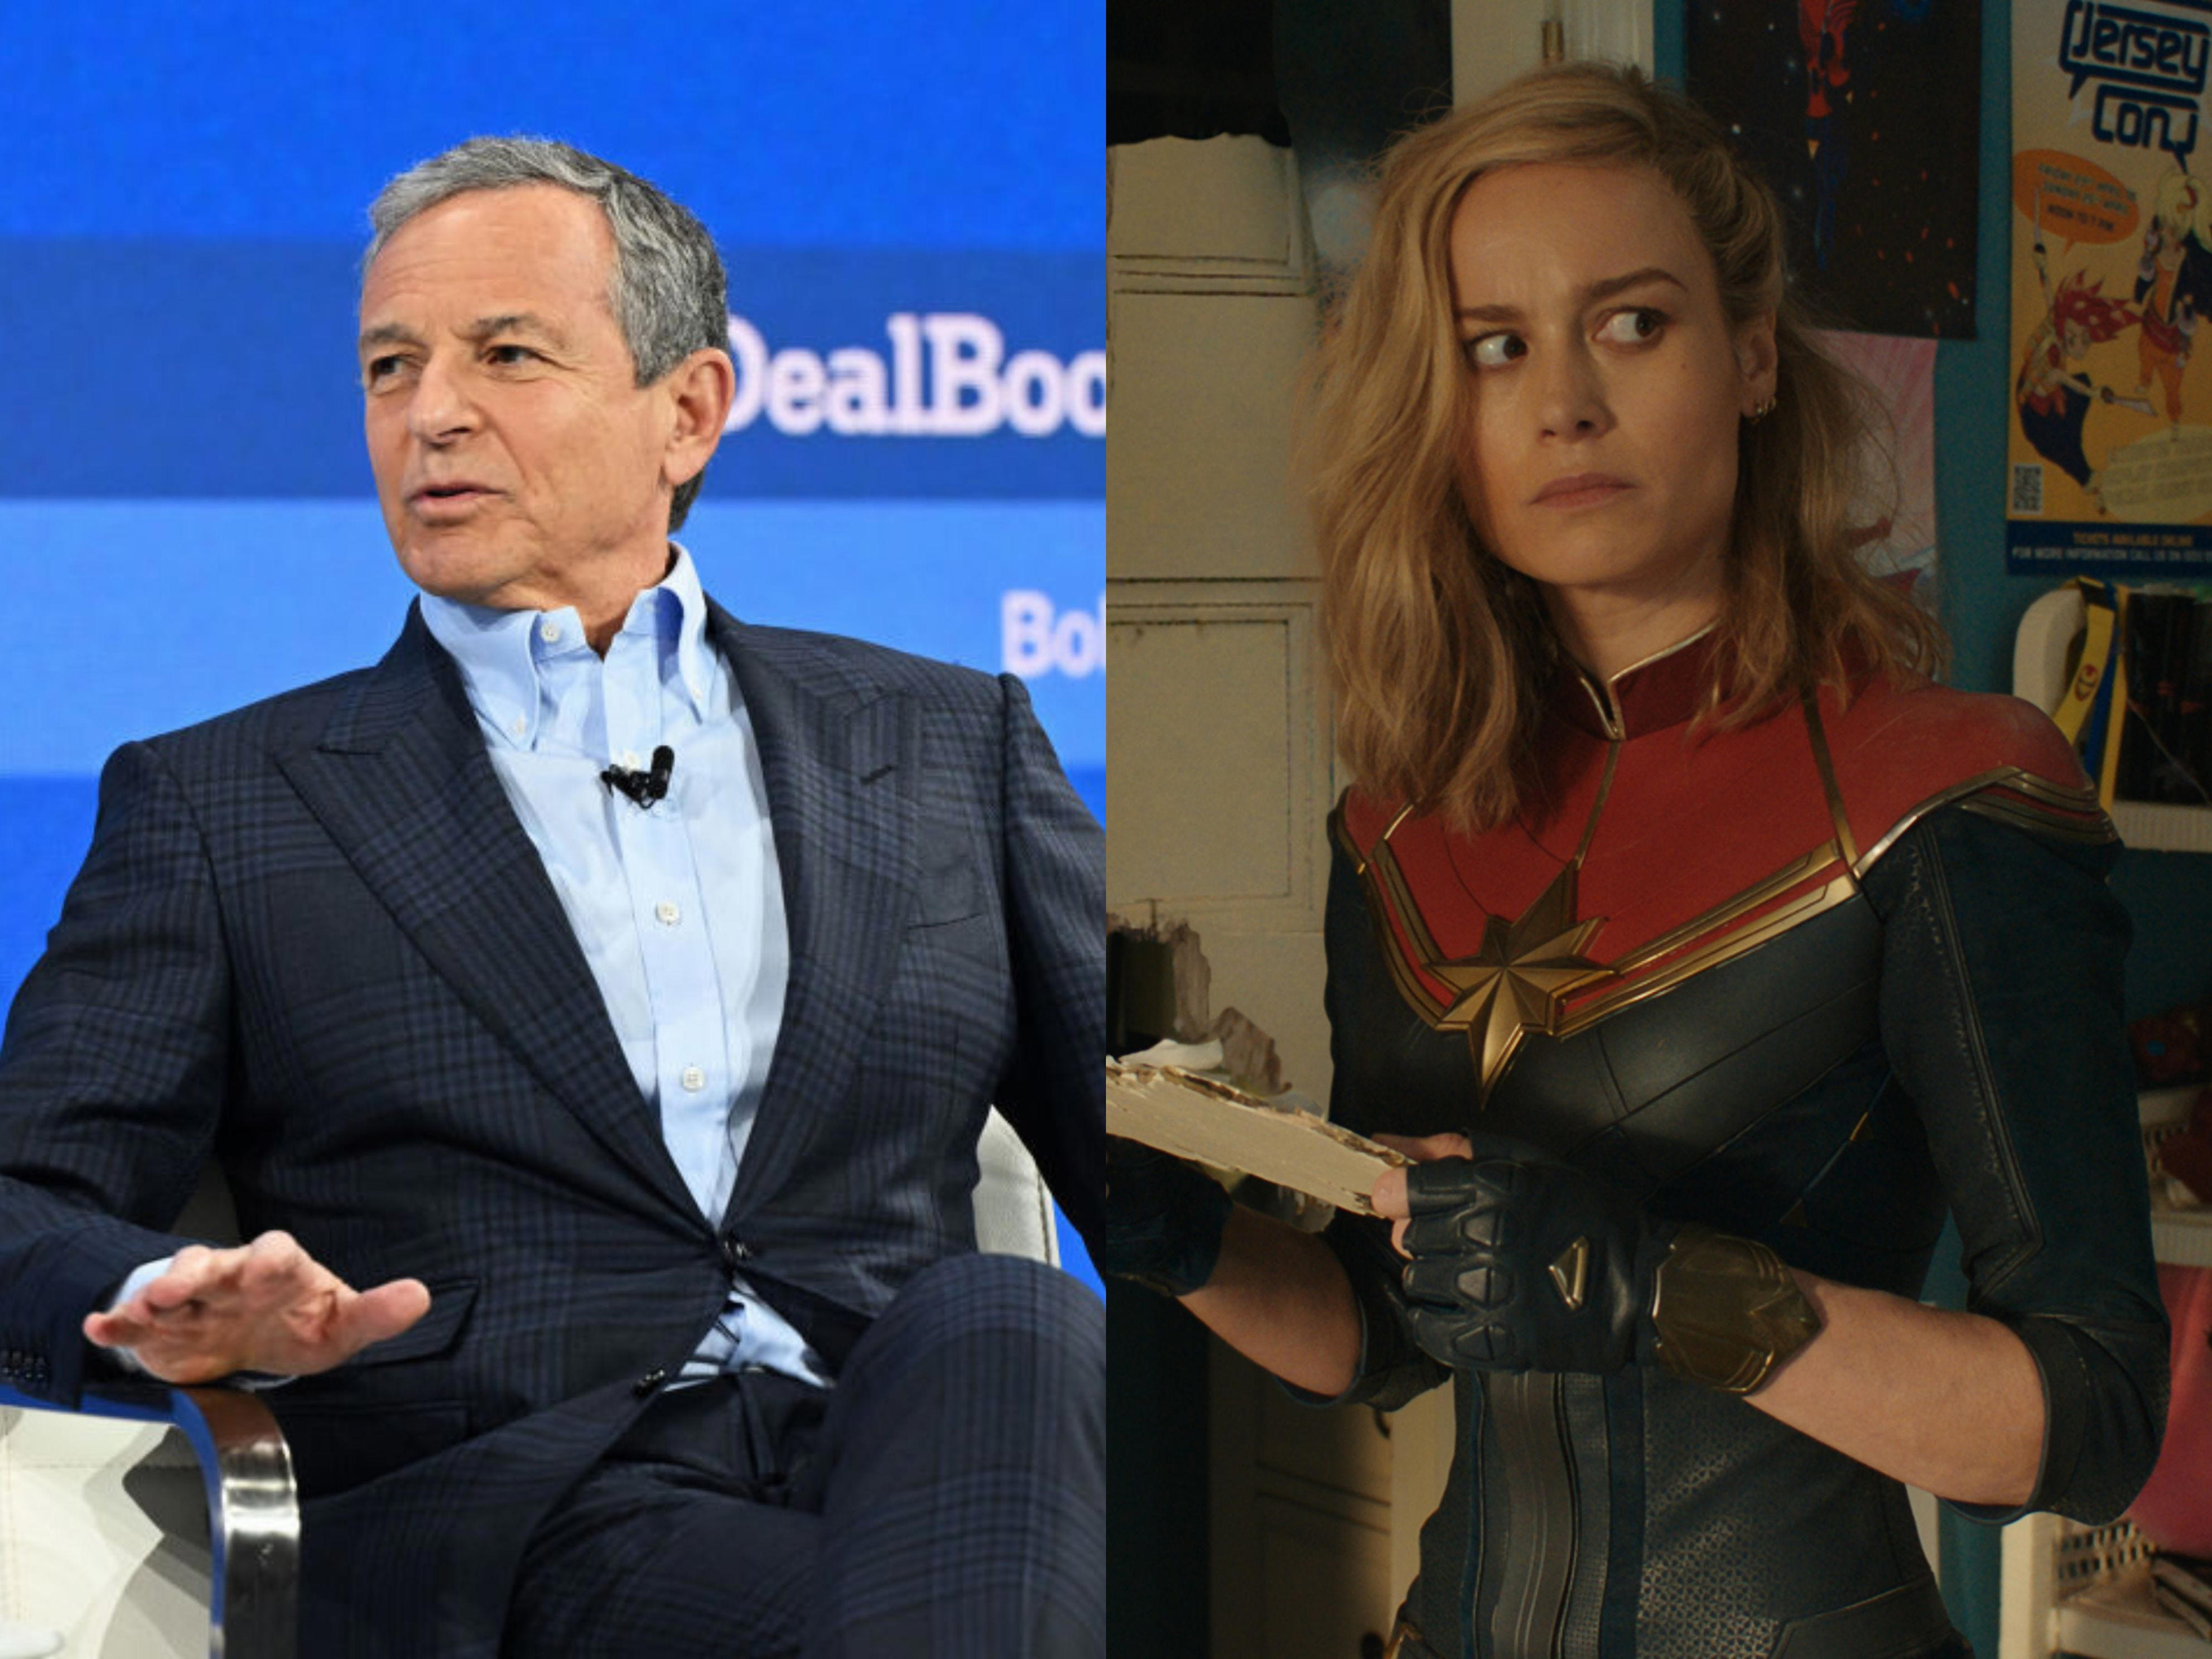 bob iger says disney made too many sequels but he won't apologize for making them